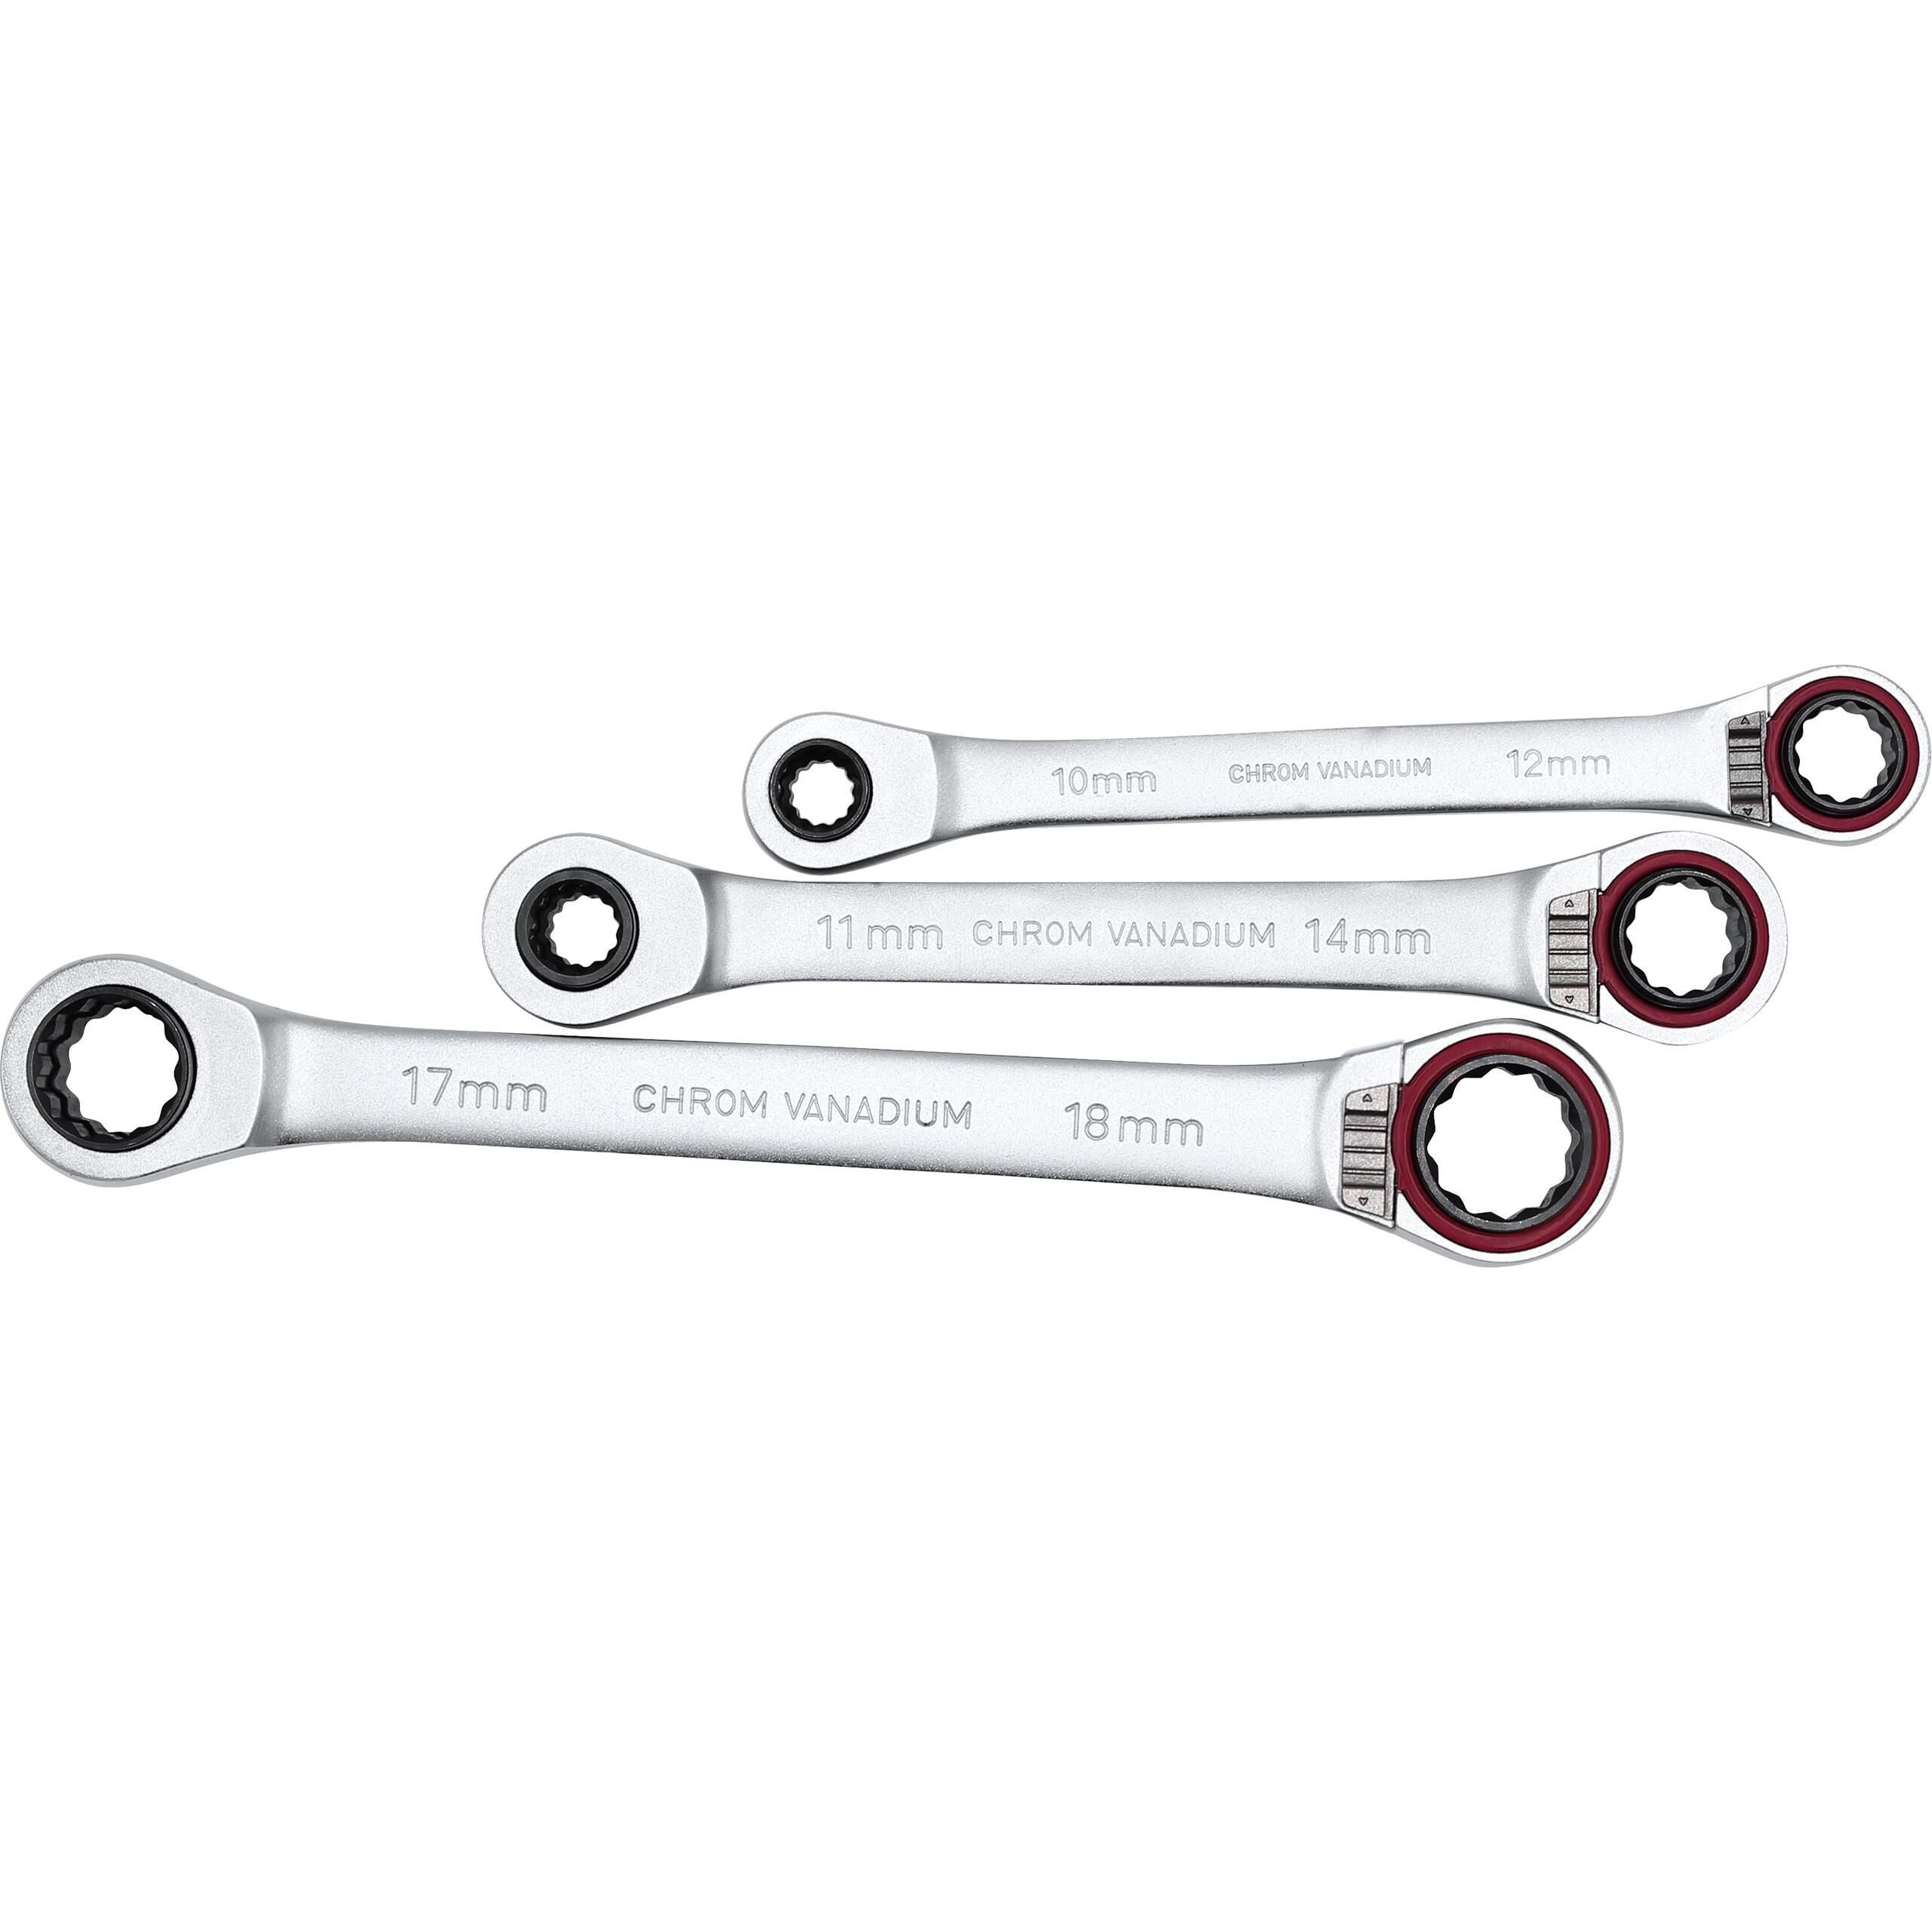 Car Dirt Bike 5.5-24mm Double Ring Offset Spanner Wrench Scooter Steel Chrome US